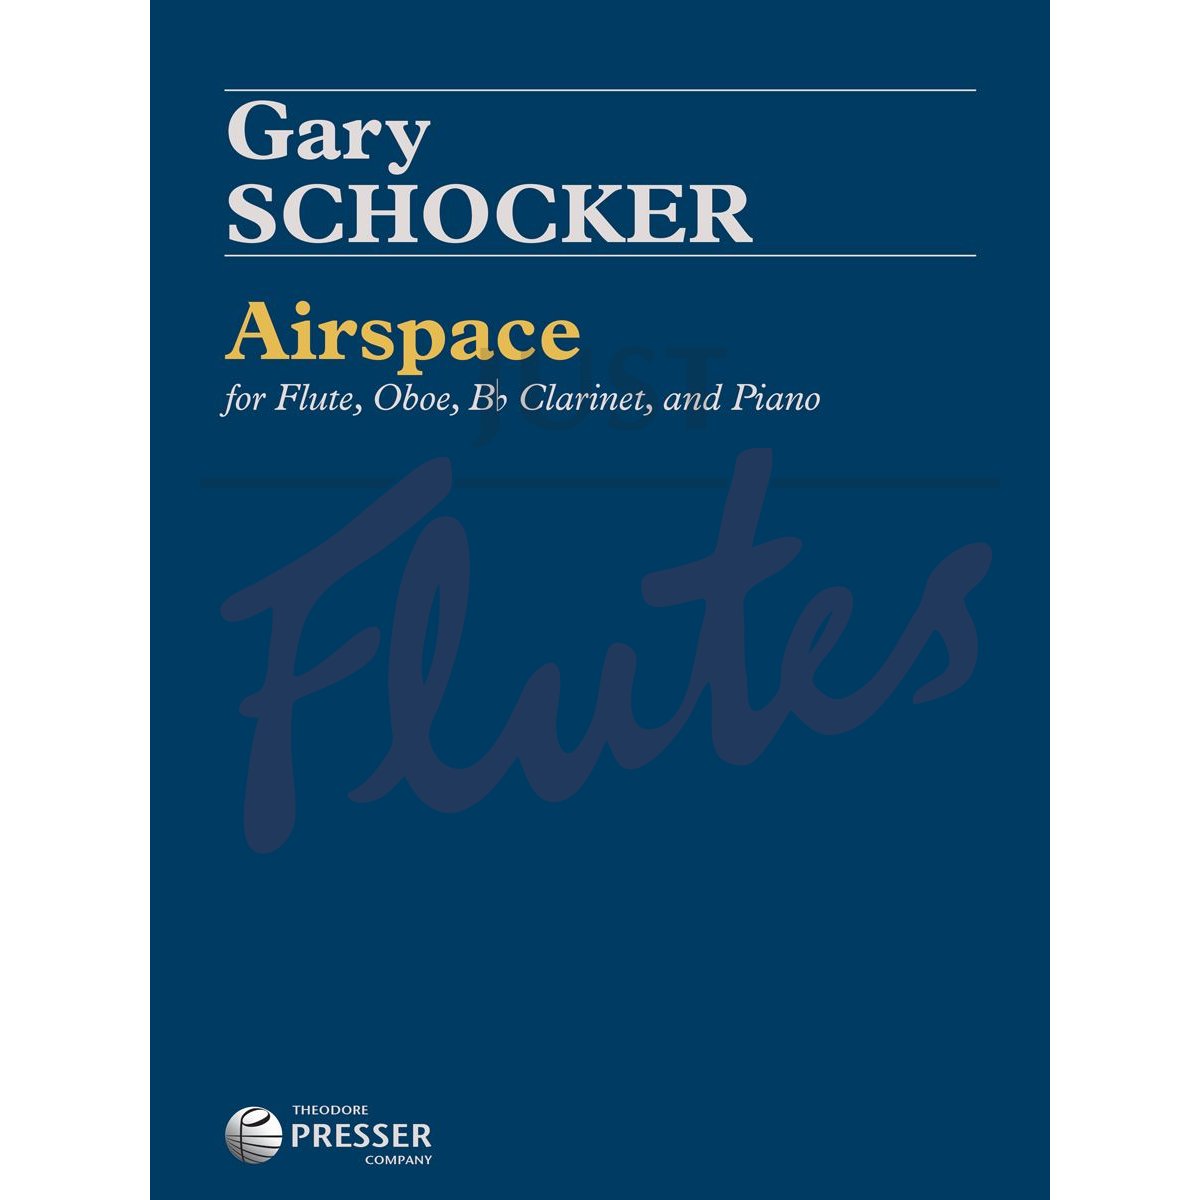 Airspace for Flute, Oboe, Clarinet and Piano